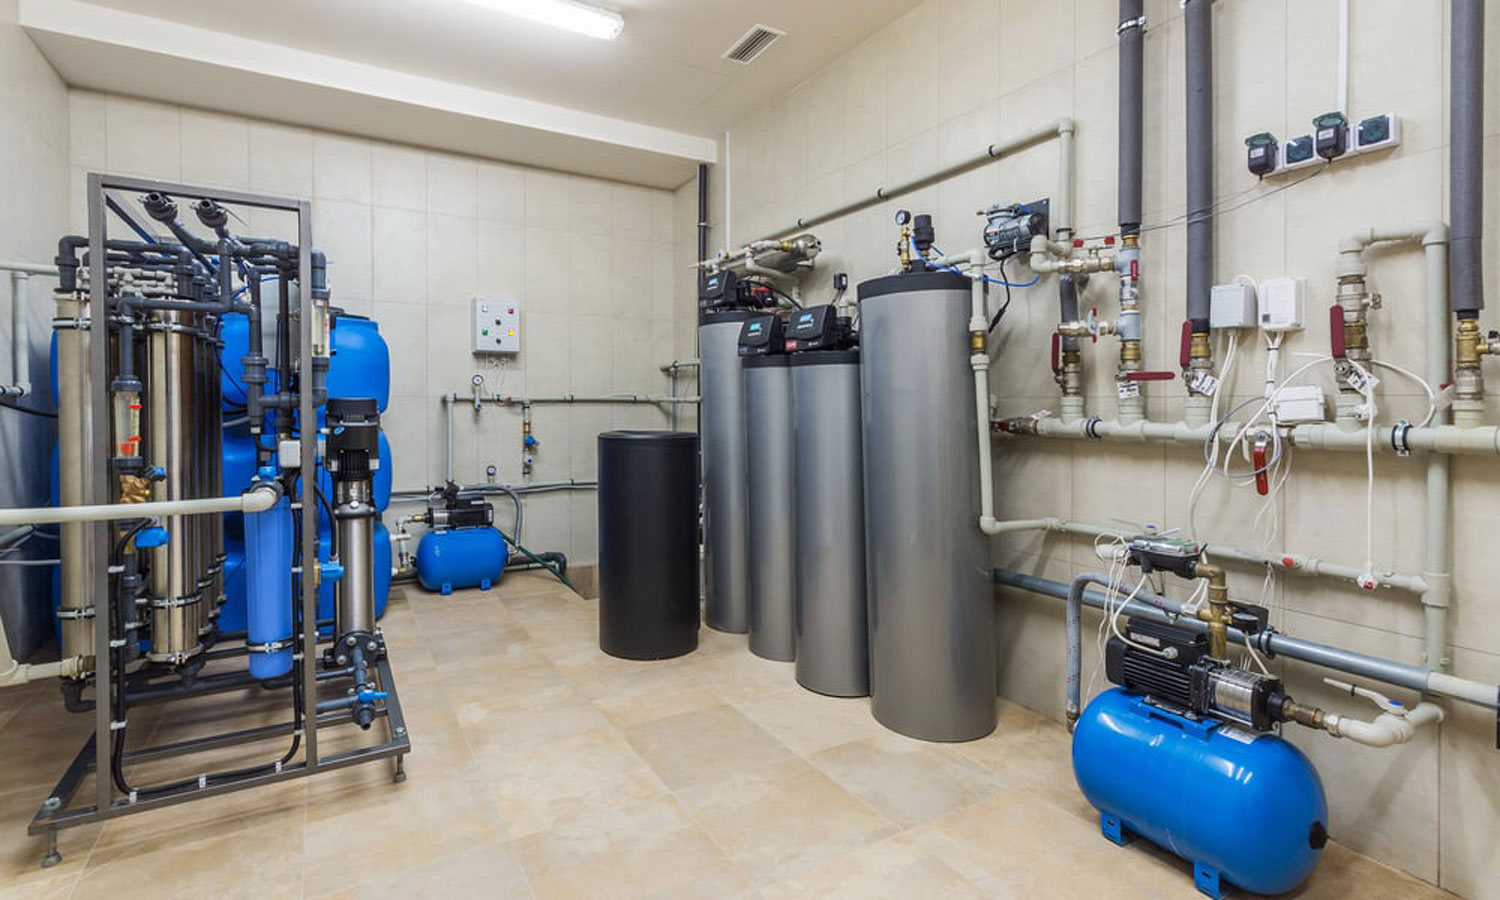 Water softeners are also necessary for a home